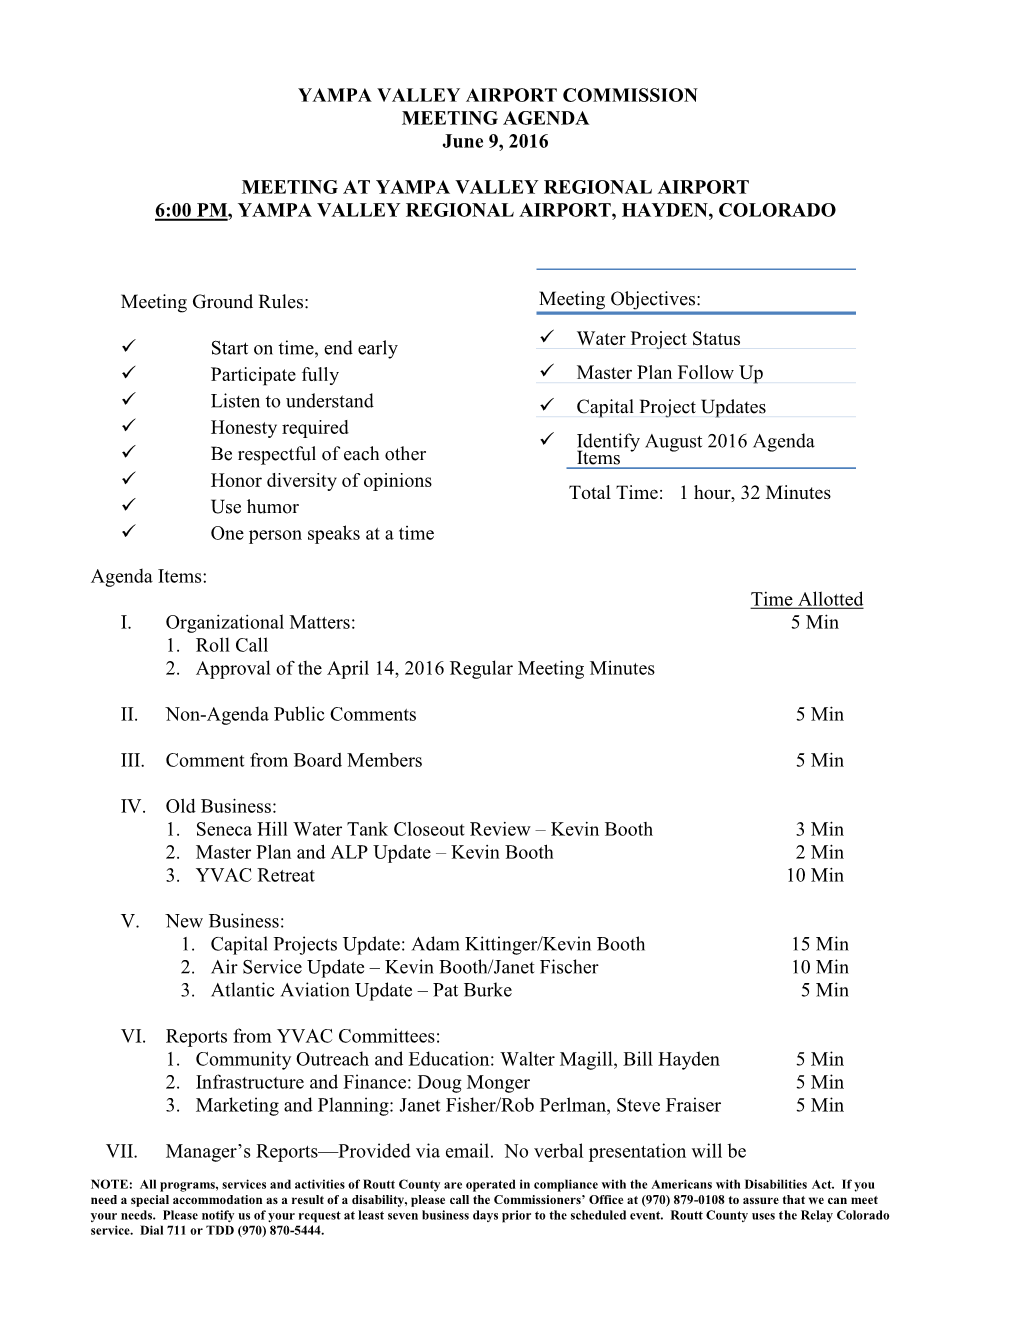 YAMPA VALLEY AIRPORT COMMISSION MEETING AGENDA June 9, 2016